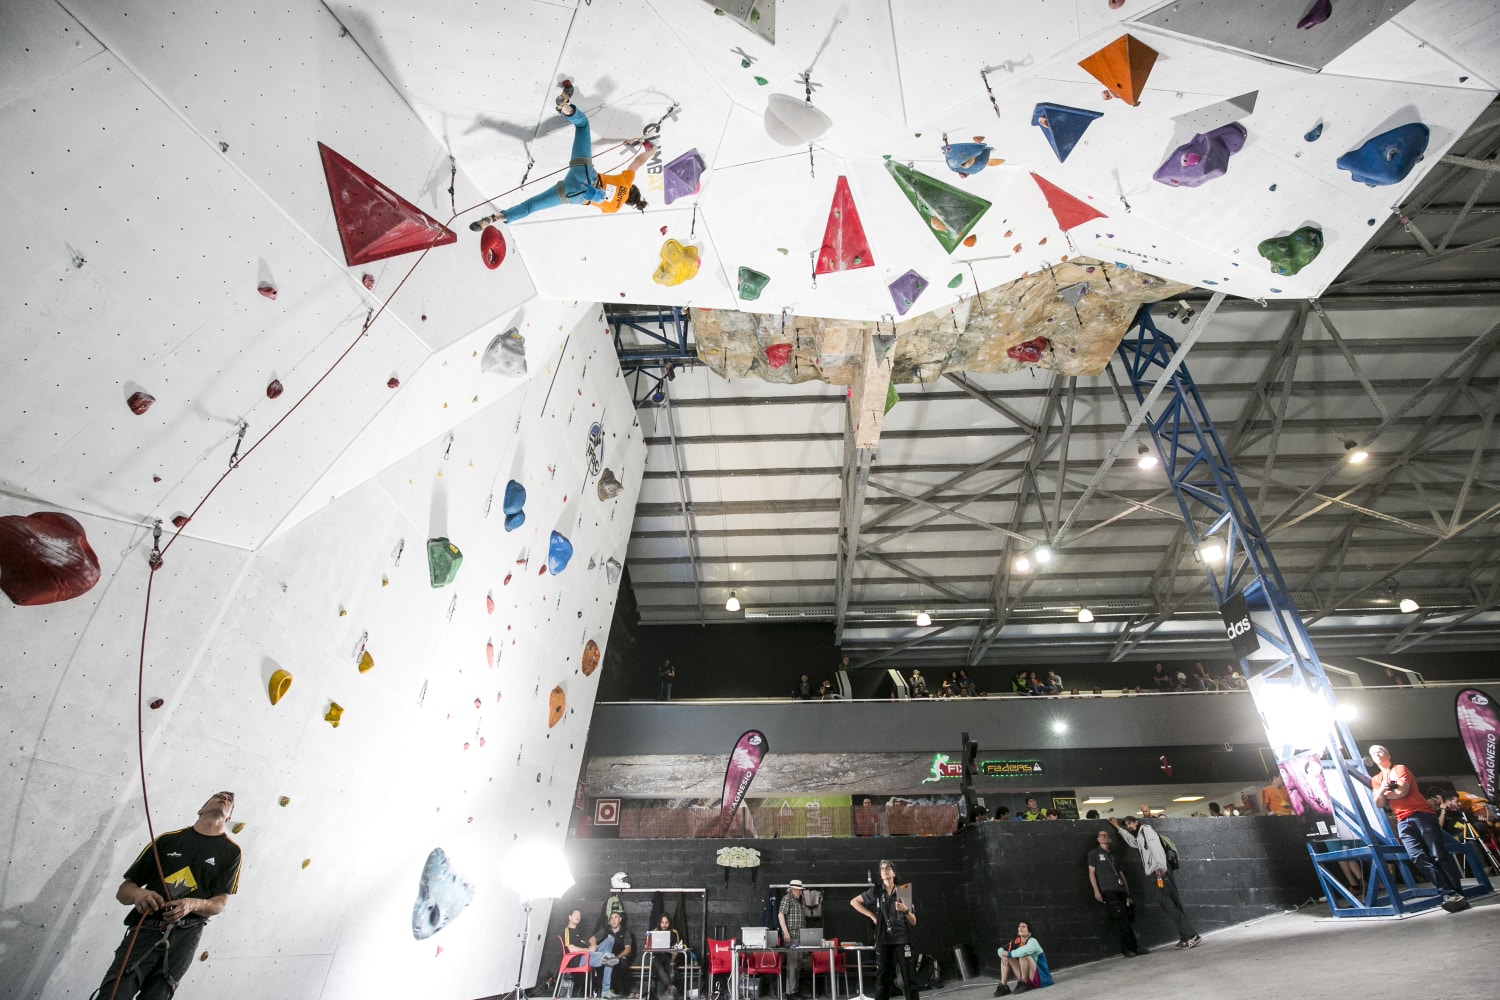 Do you want to start climbing? You can practice in these climbing walls